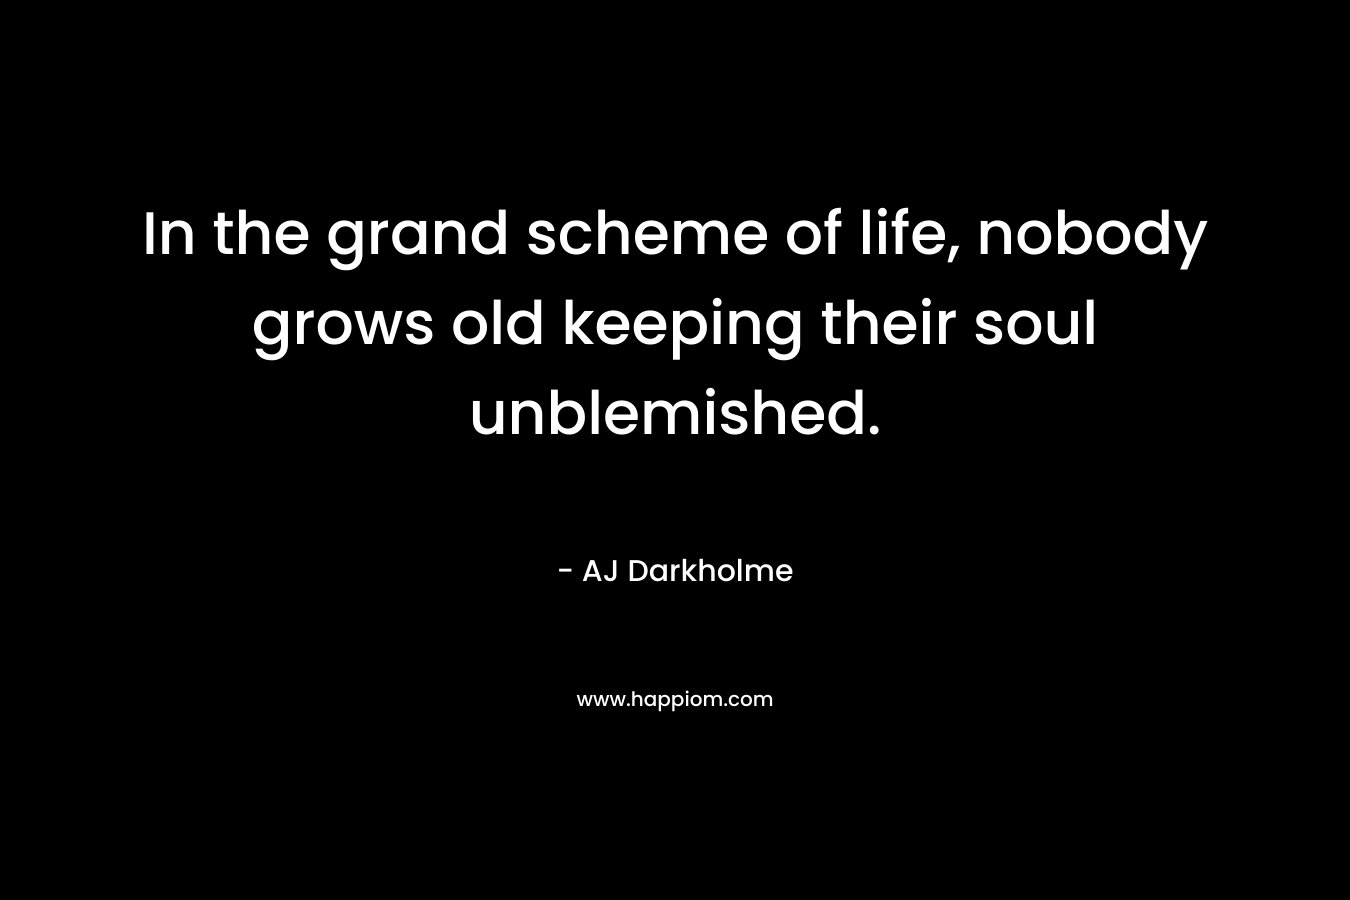 In the grand scheme of life, nobody grows old keeping their soul unblemished.